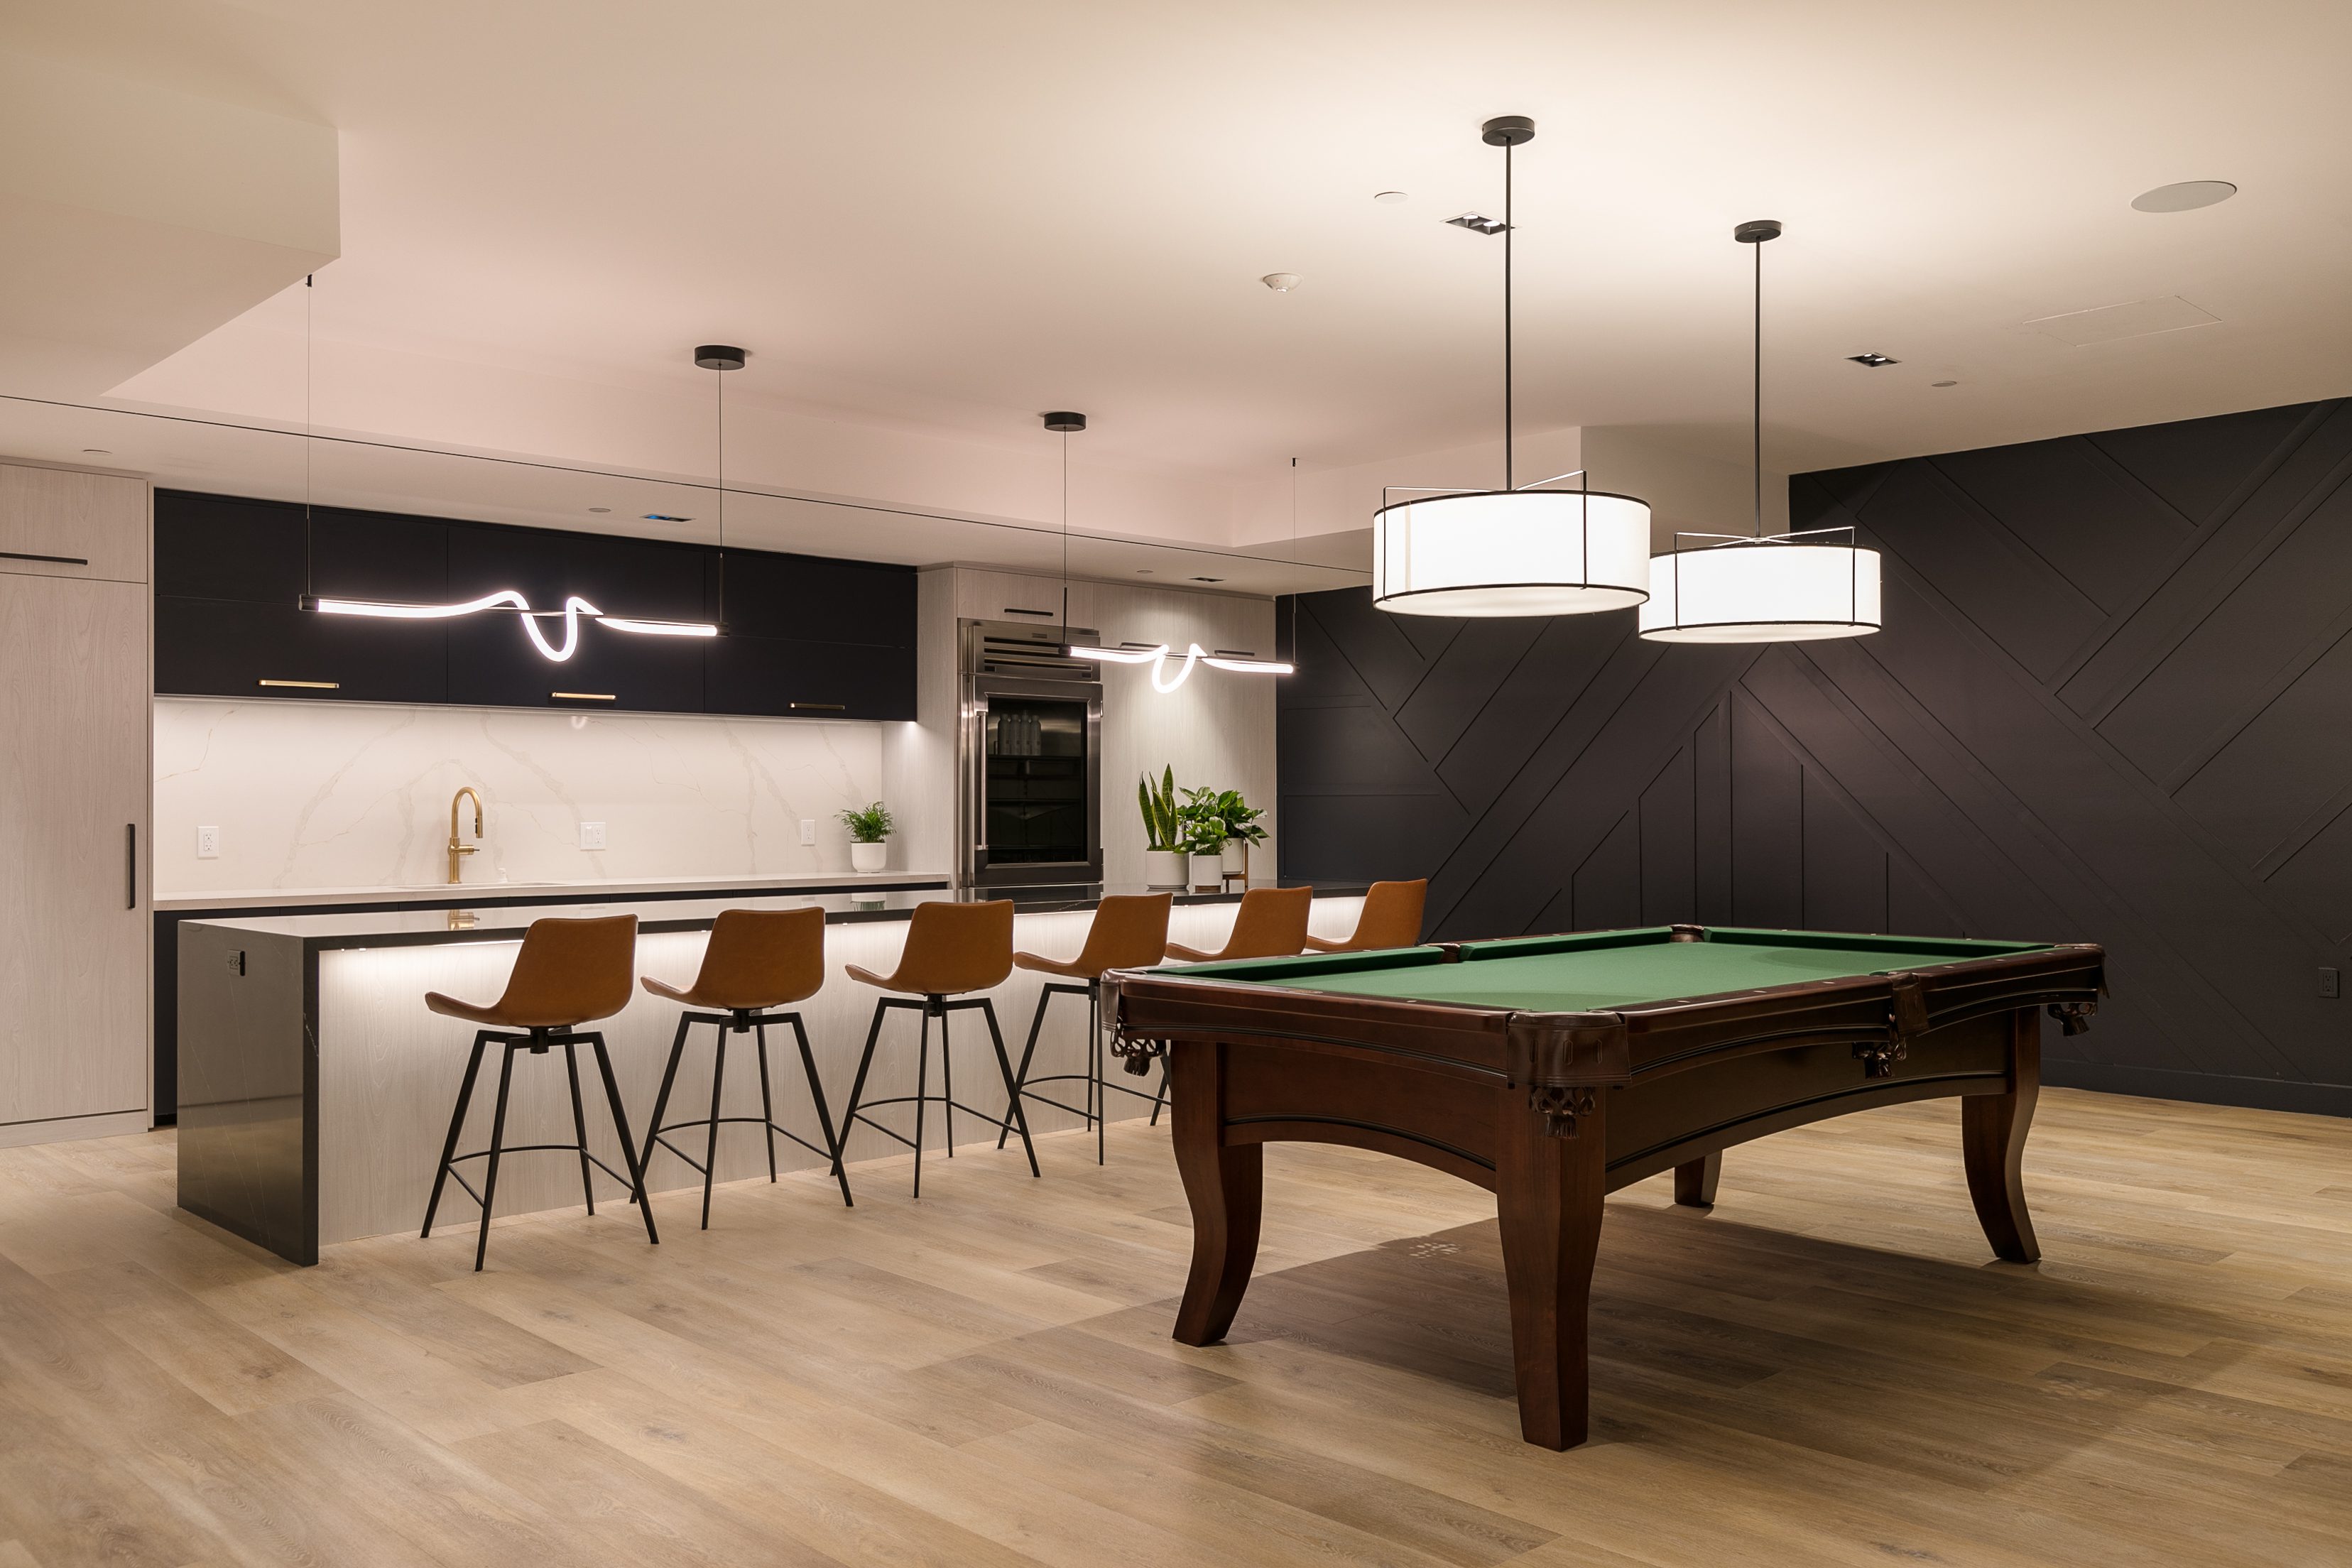 A multifamily apartment featuring The Rinrose game room equipped with a pool table and bar stools.